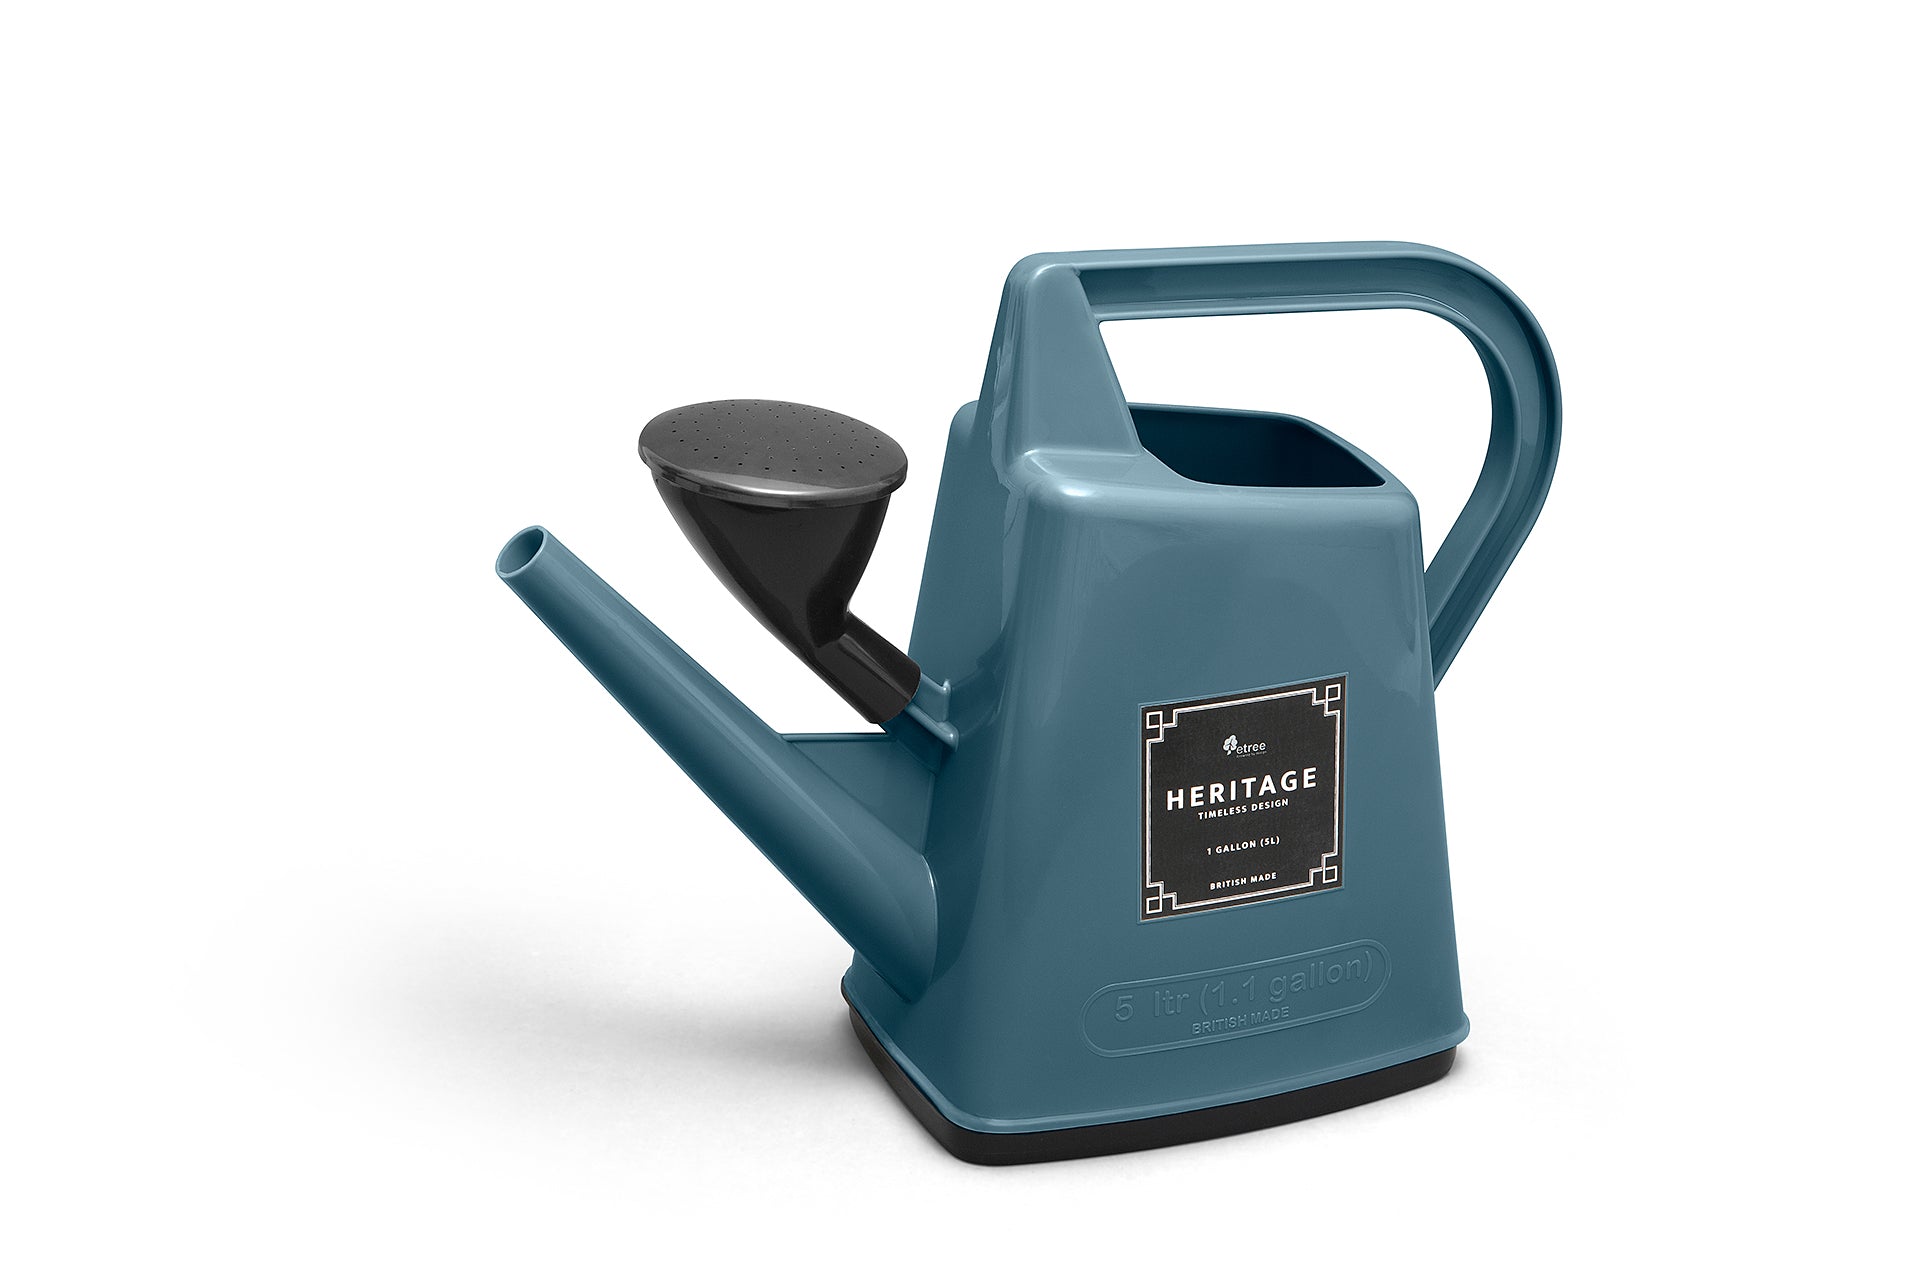 Heritage Watering Can in teal blue 5 litre or 1 gallon for indoor or outdoor